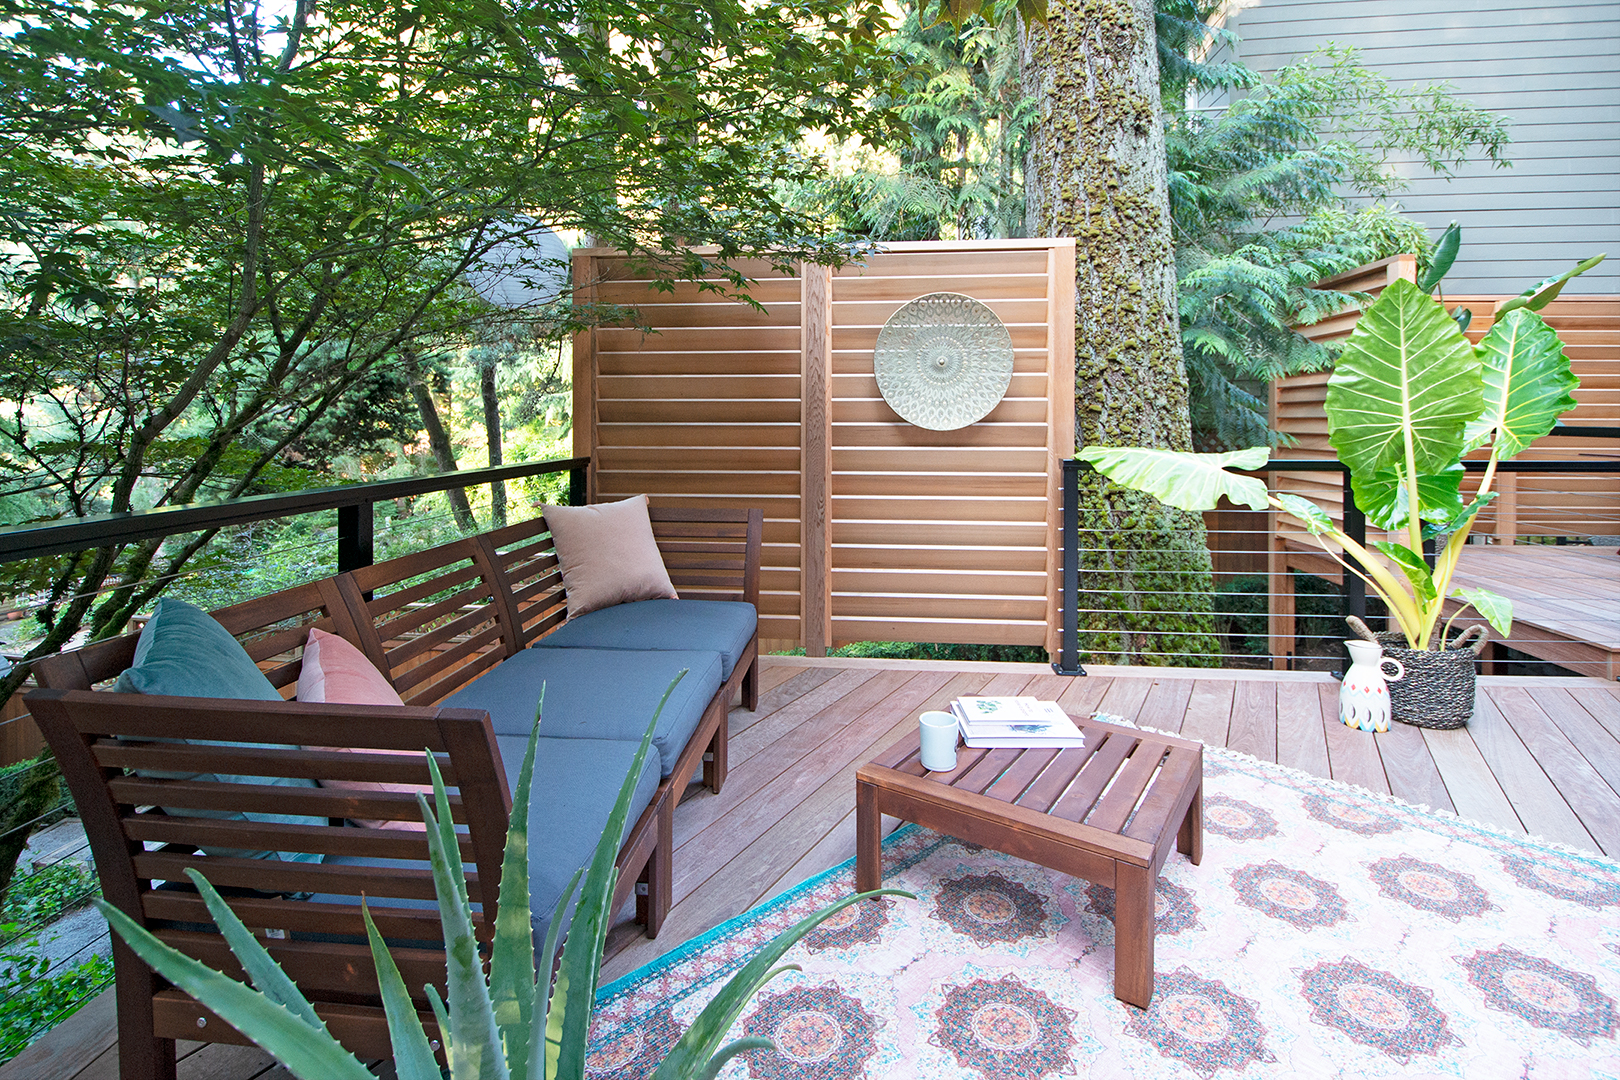 Image of a Fairview Outdoor Living Room Design and Build by Drake's 7 Dees